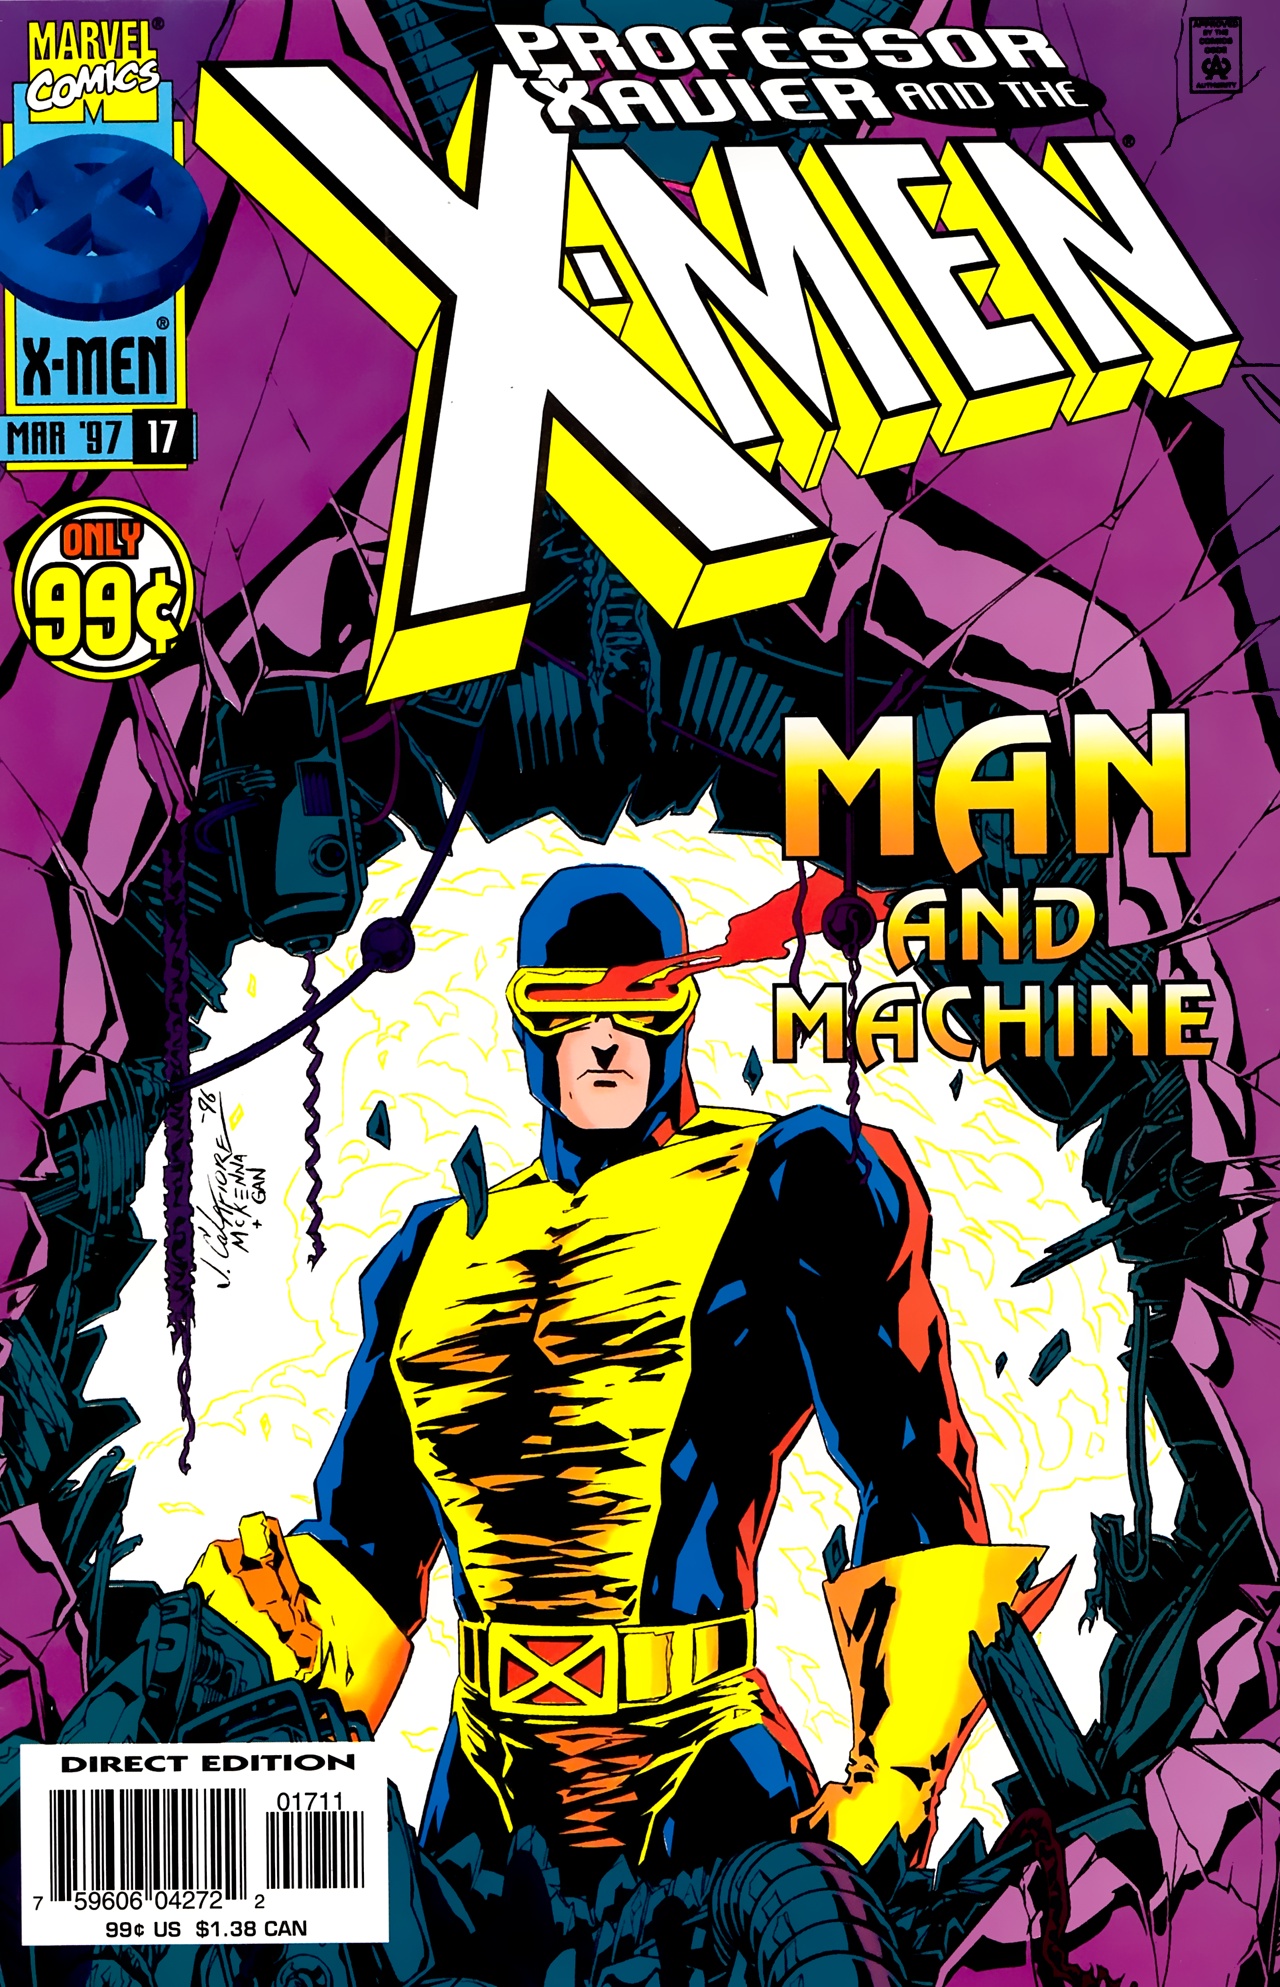 Read online Professor Xavier and the X-Men comic -  Issue #17 - 1